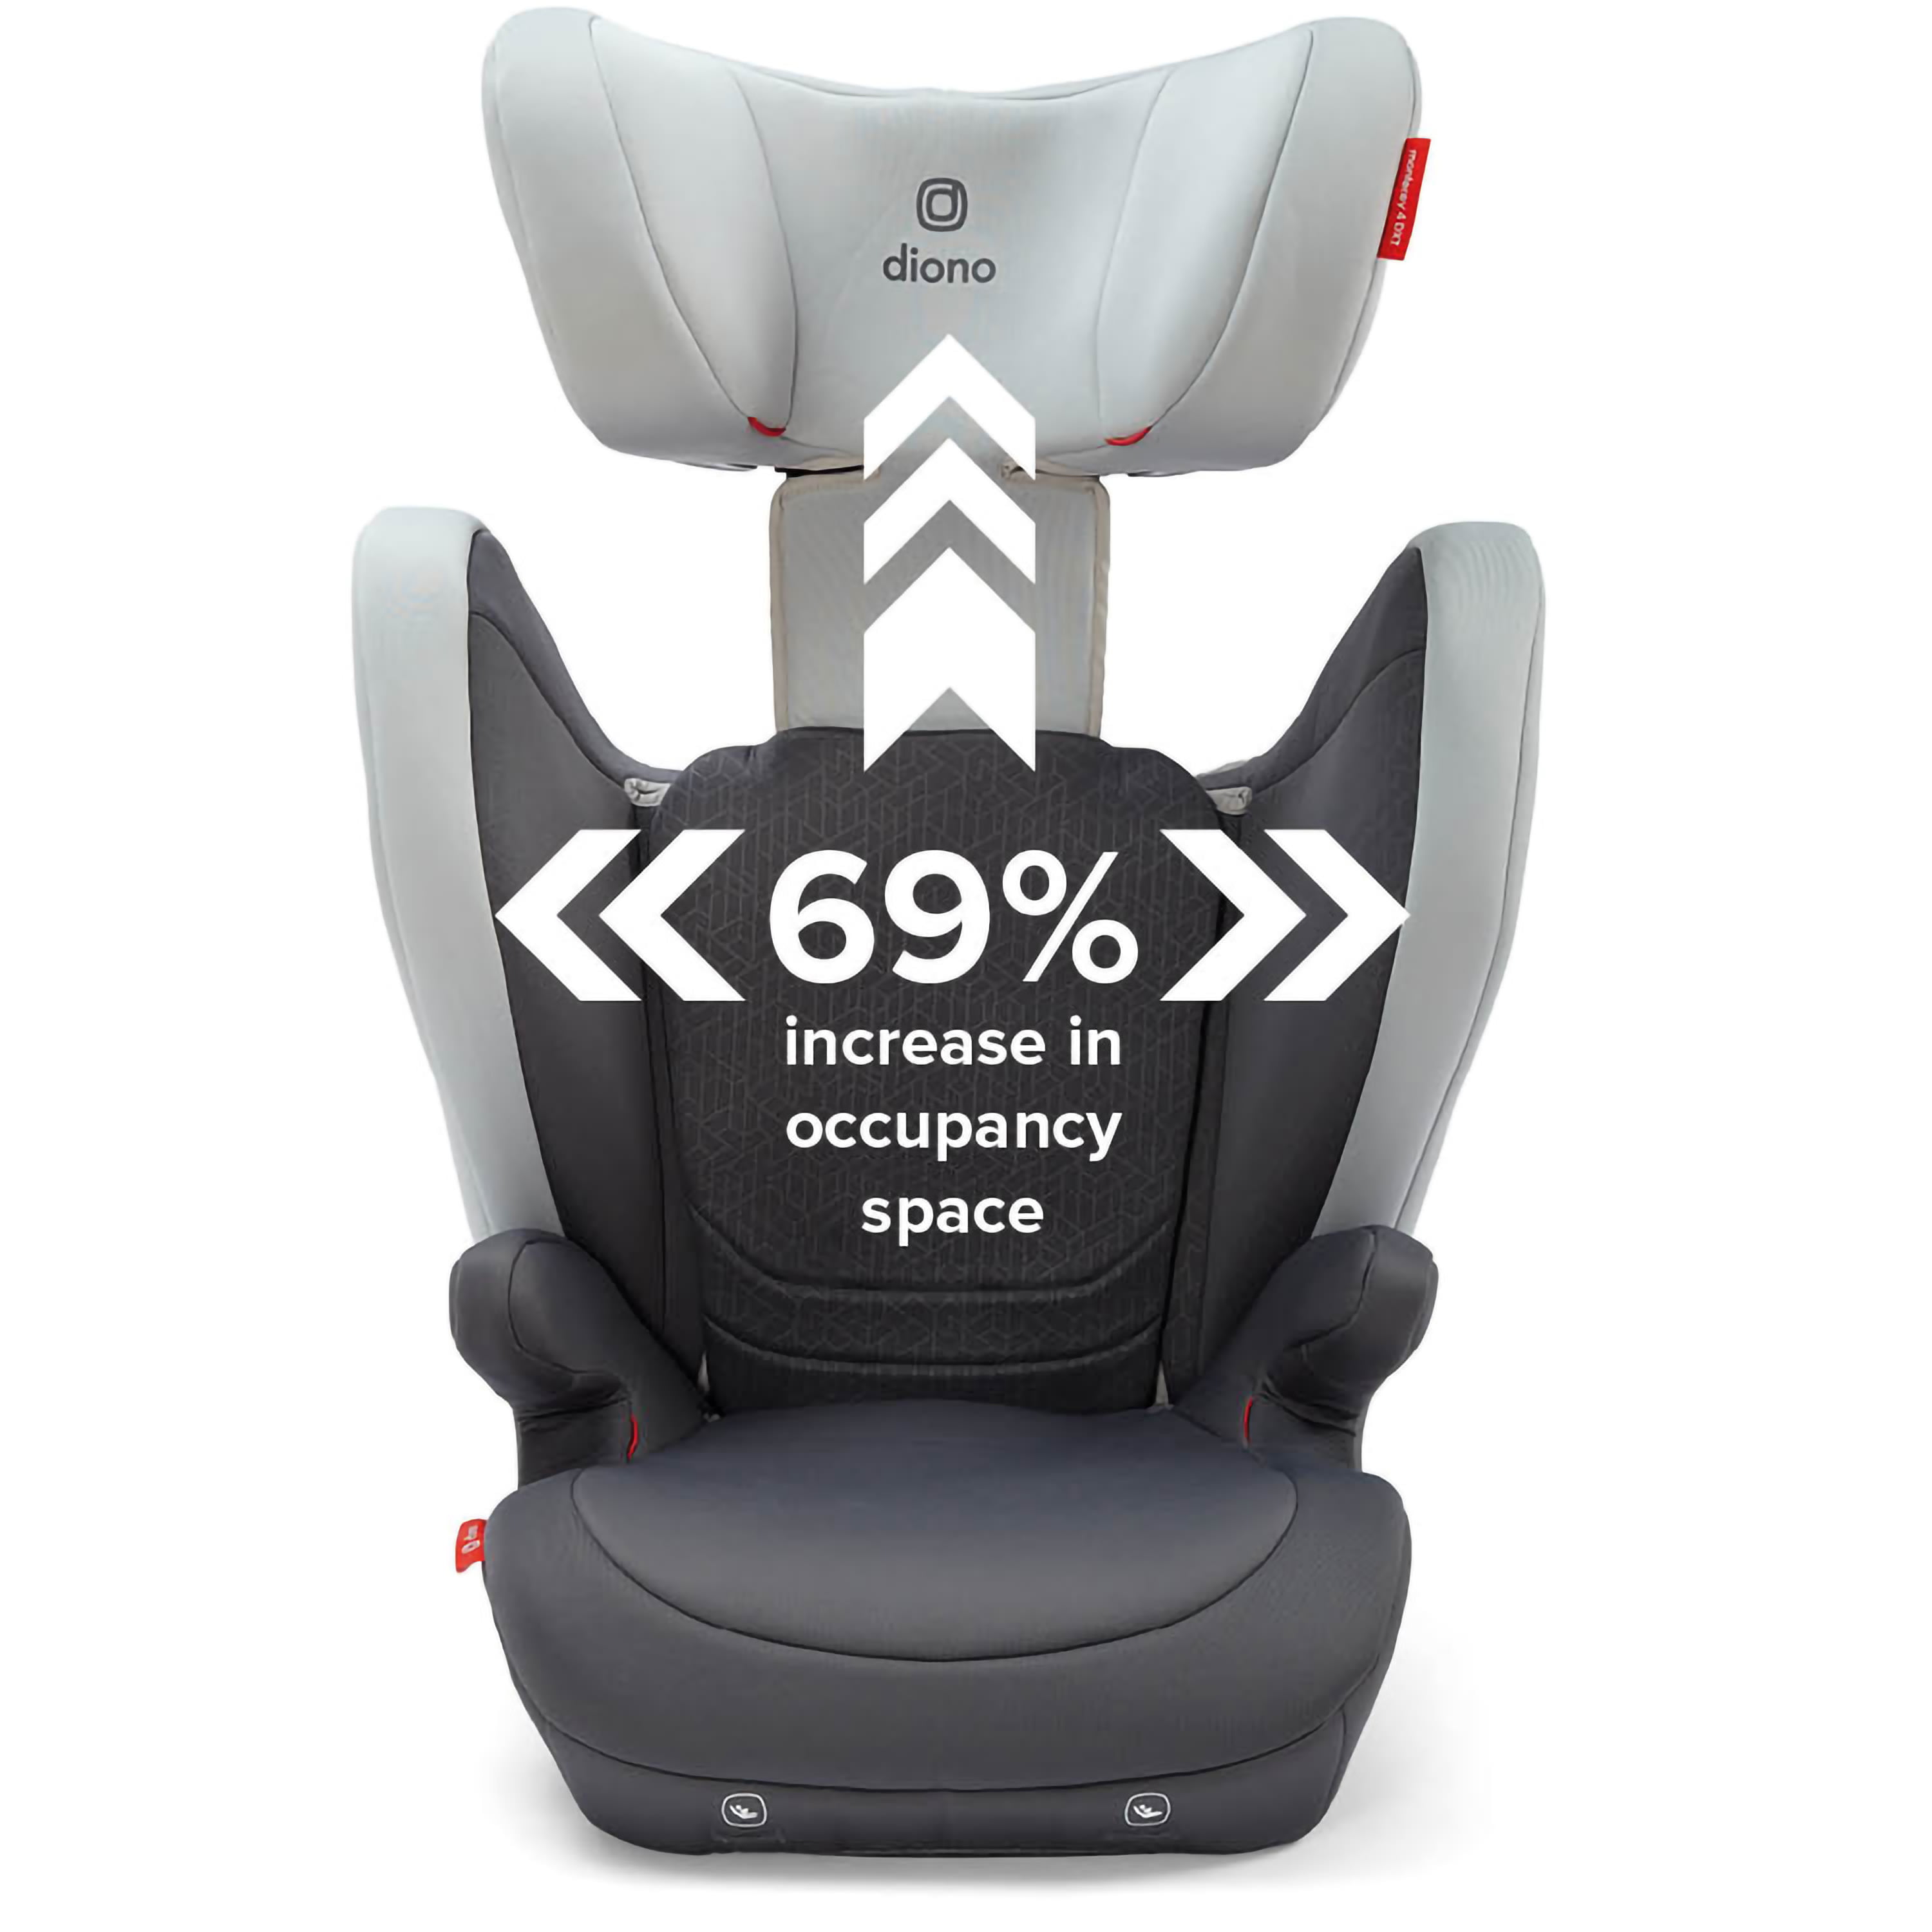 Status pot solo Diono Monterey 4DXT Latch 2-in-1 Expandable Booster Car Seat, Red -  Walmart.com